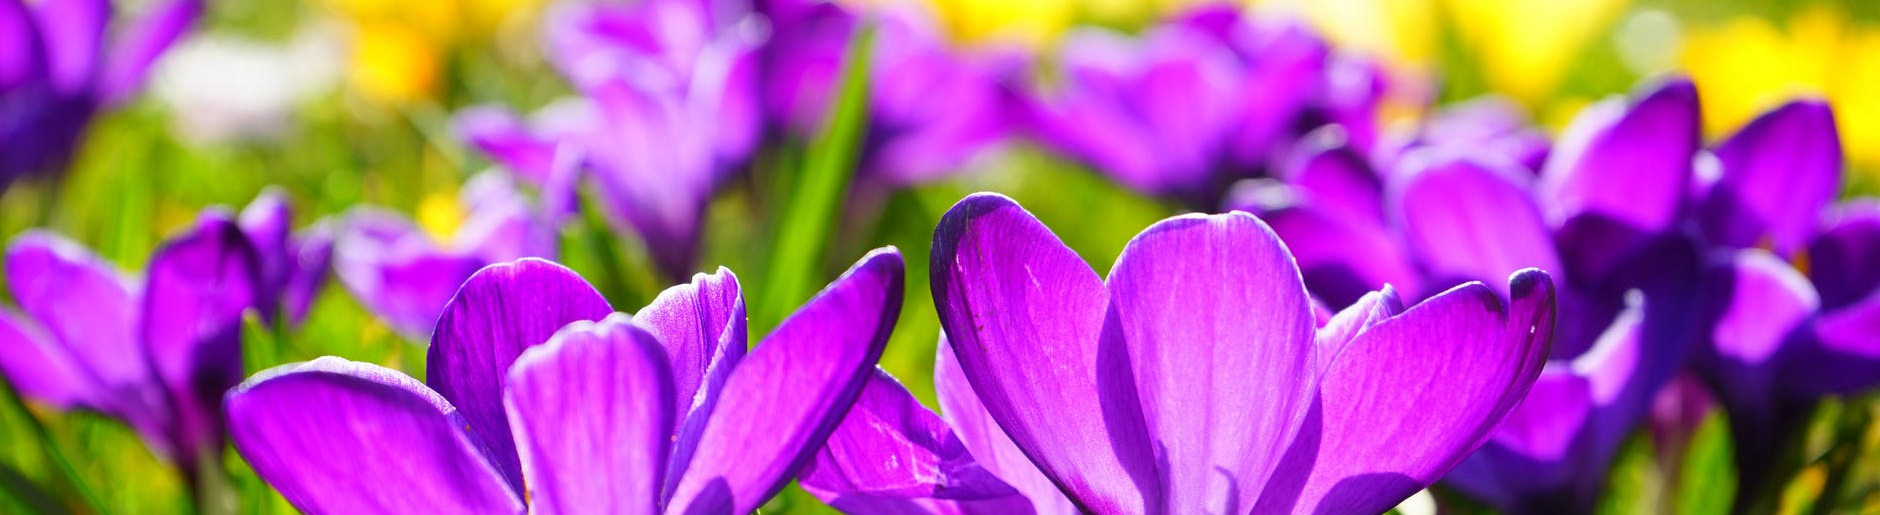 Purple and yellow spring flowers